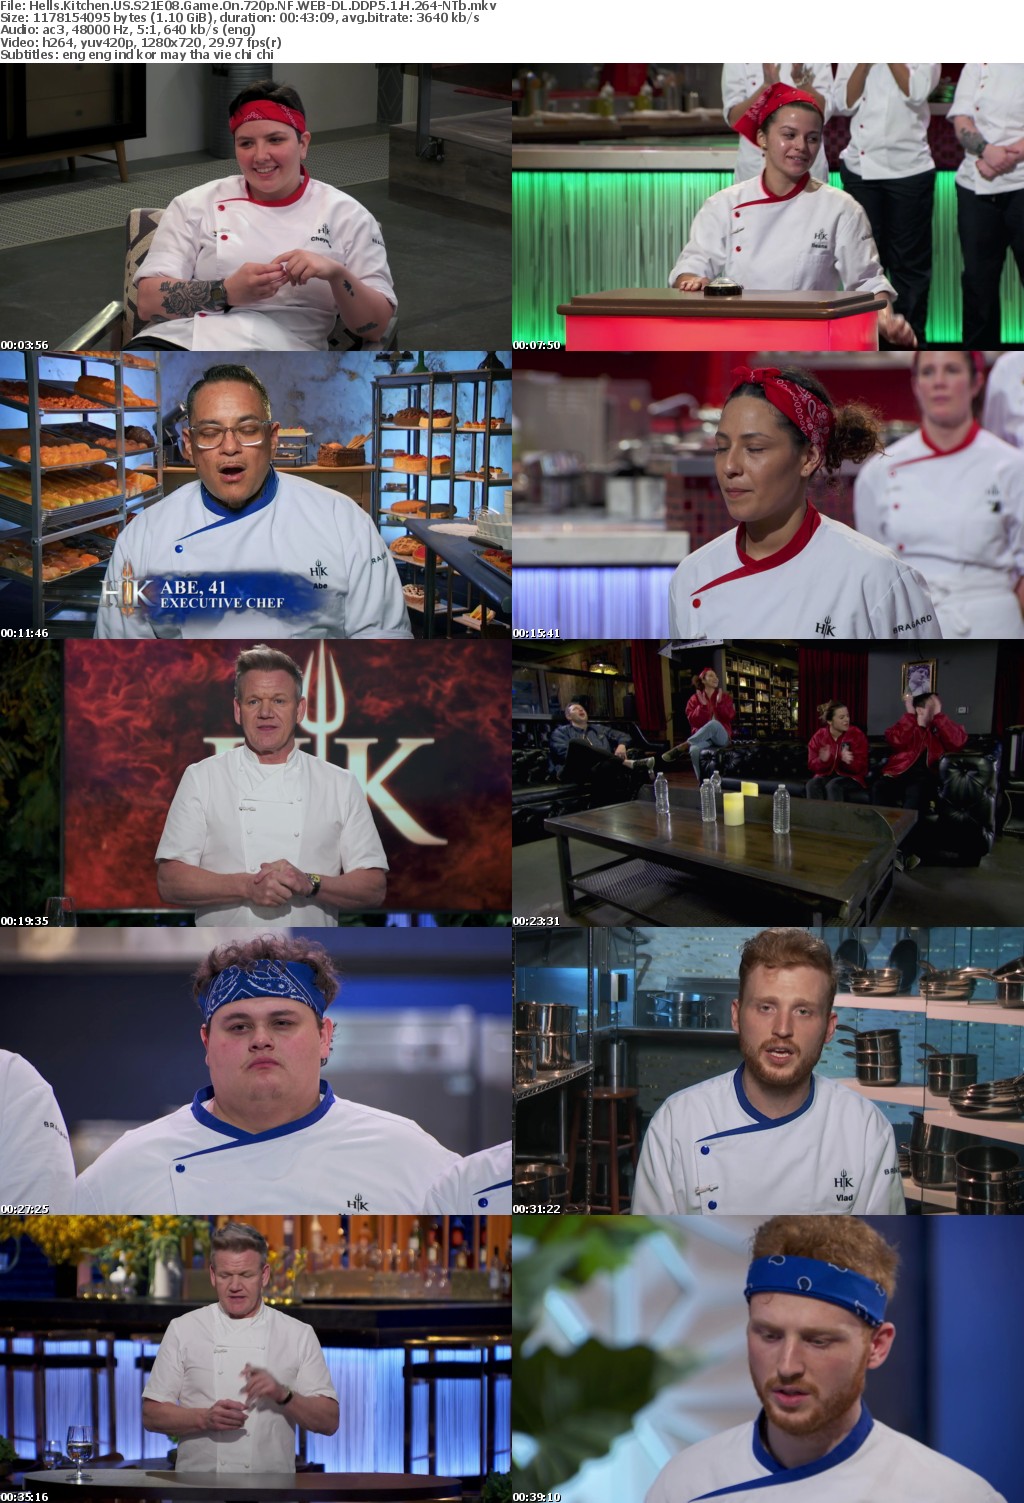 Hells Kitchen US S21E08 Game On 720p NF WEBRip DDP5 1 x264-NTb